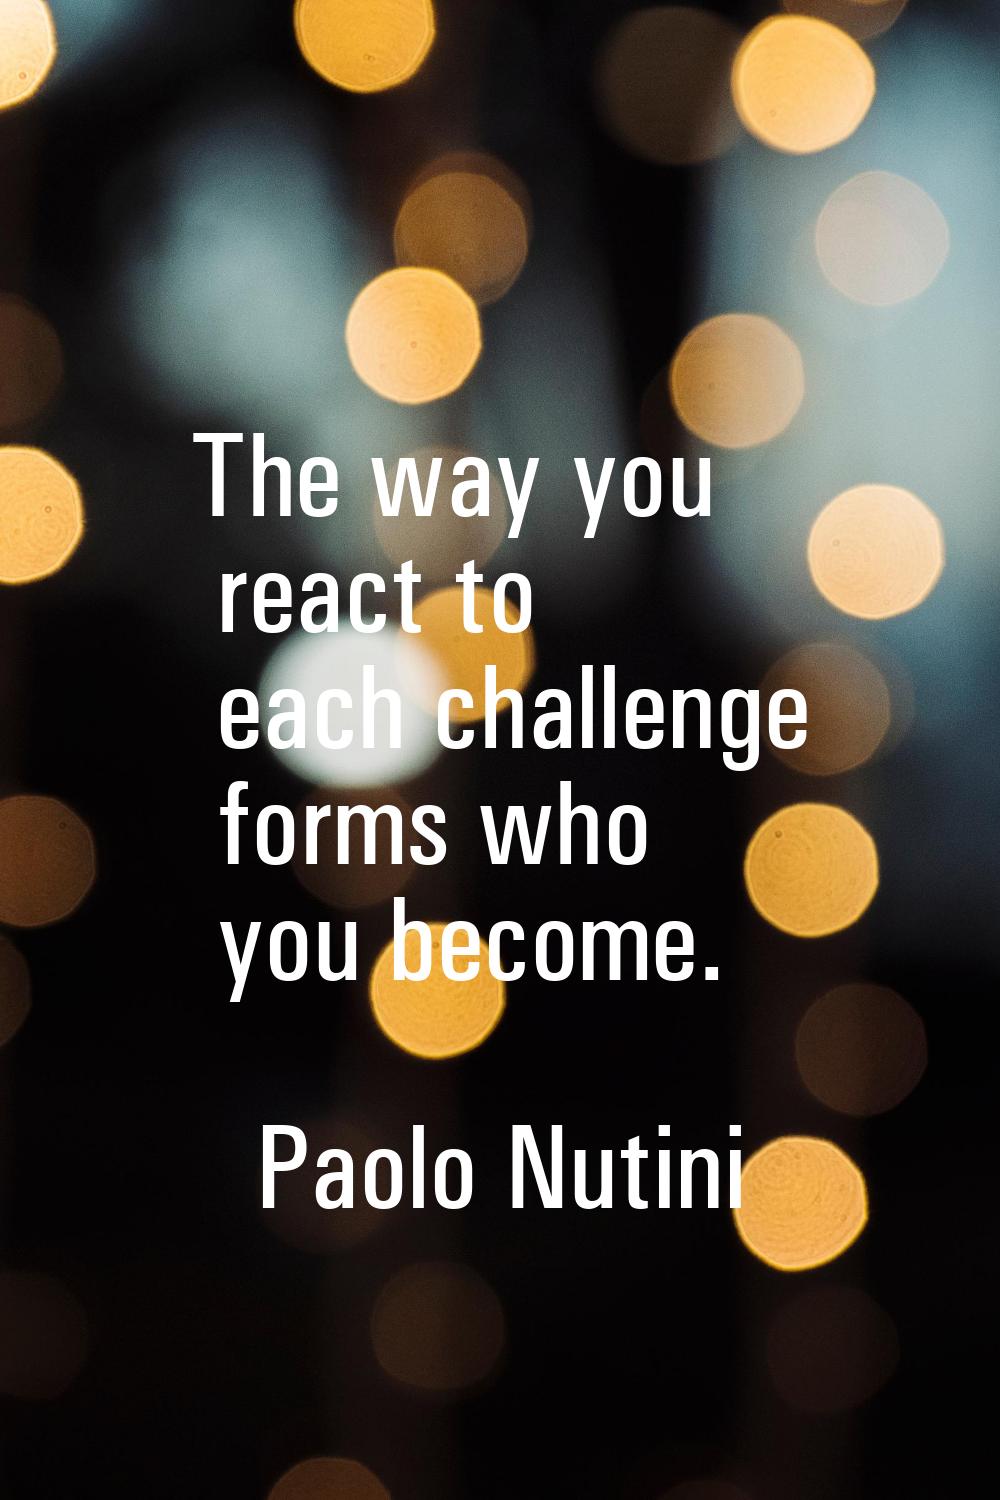 The way you react to each challenge forms who you become.